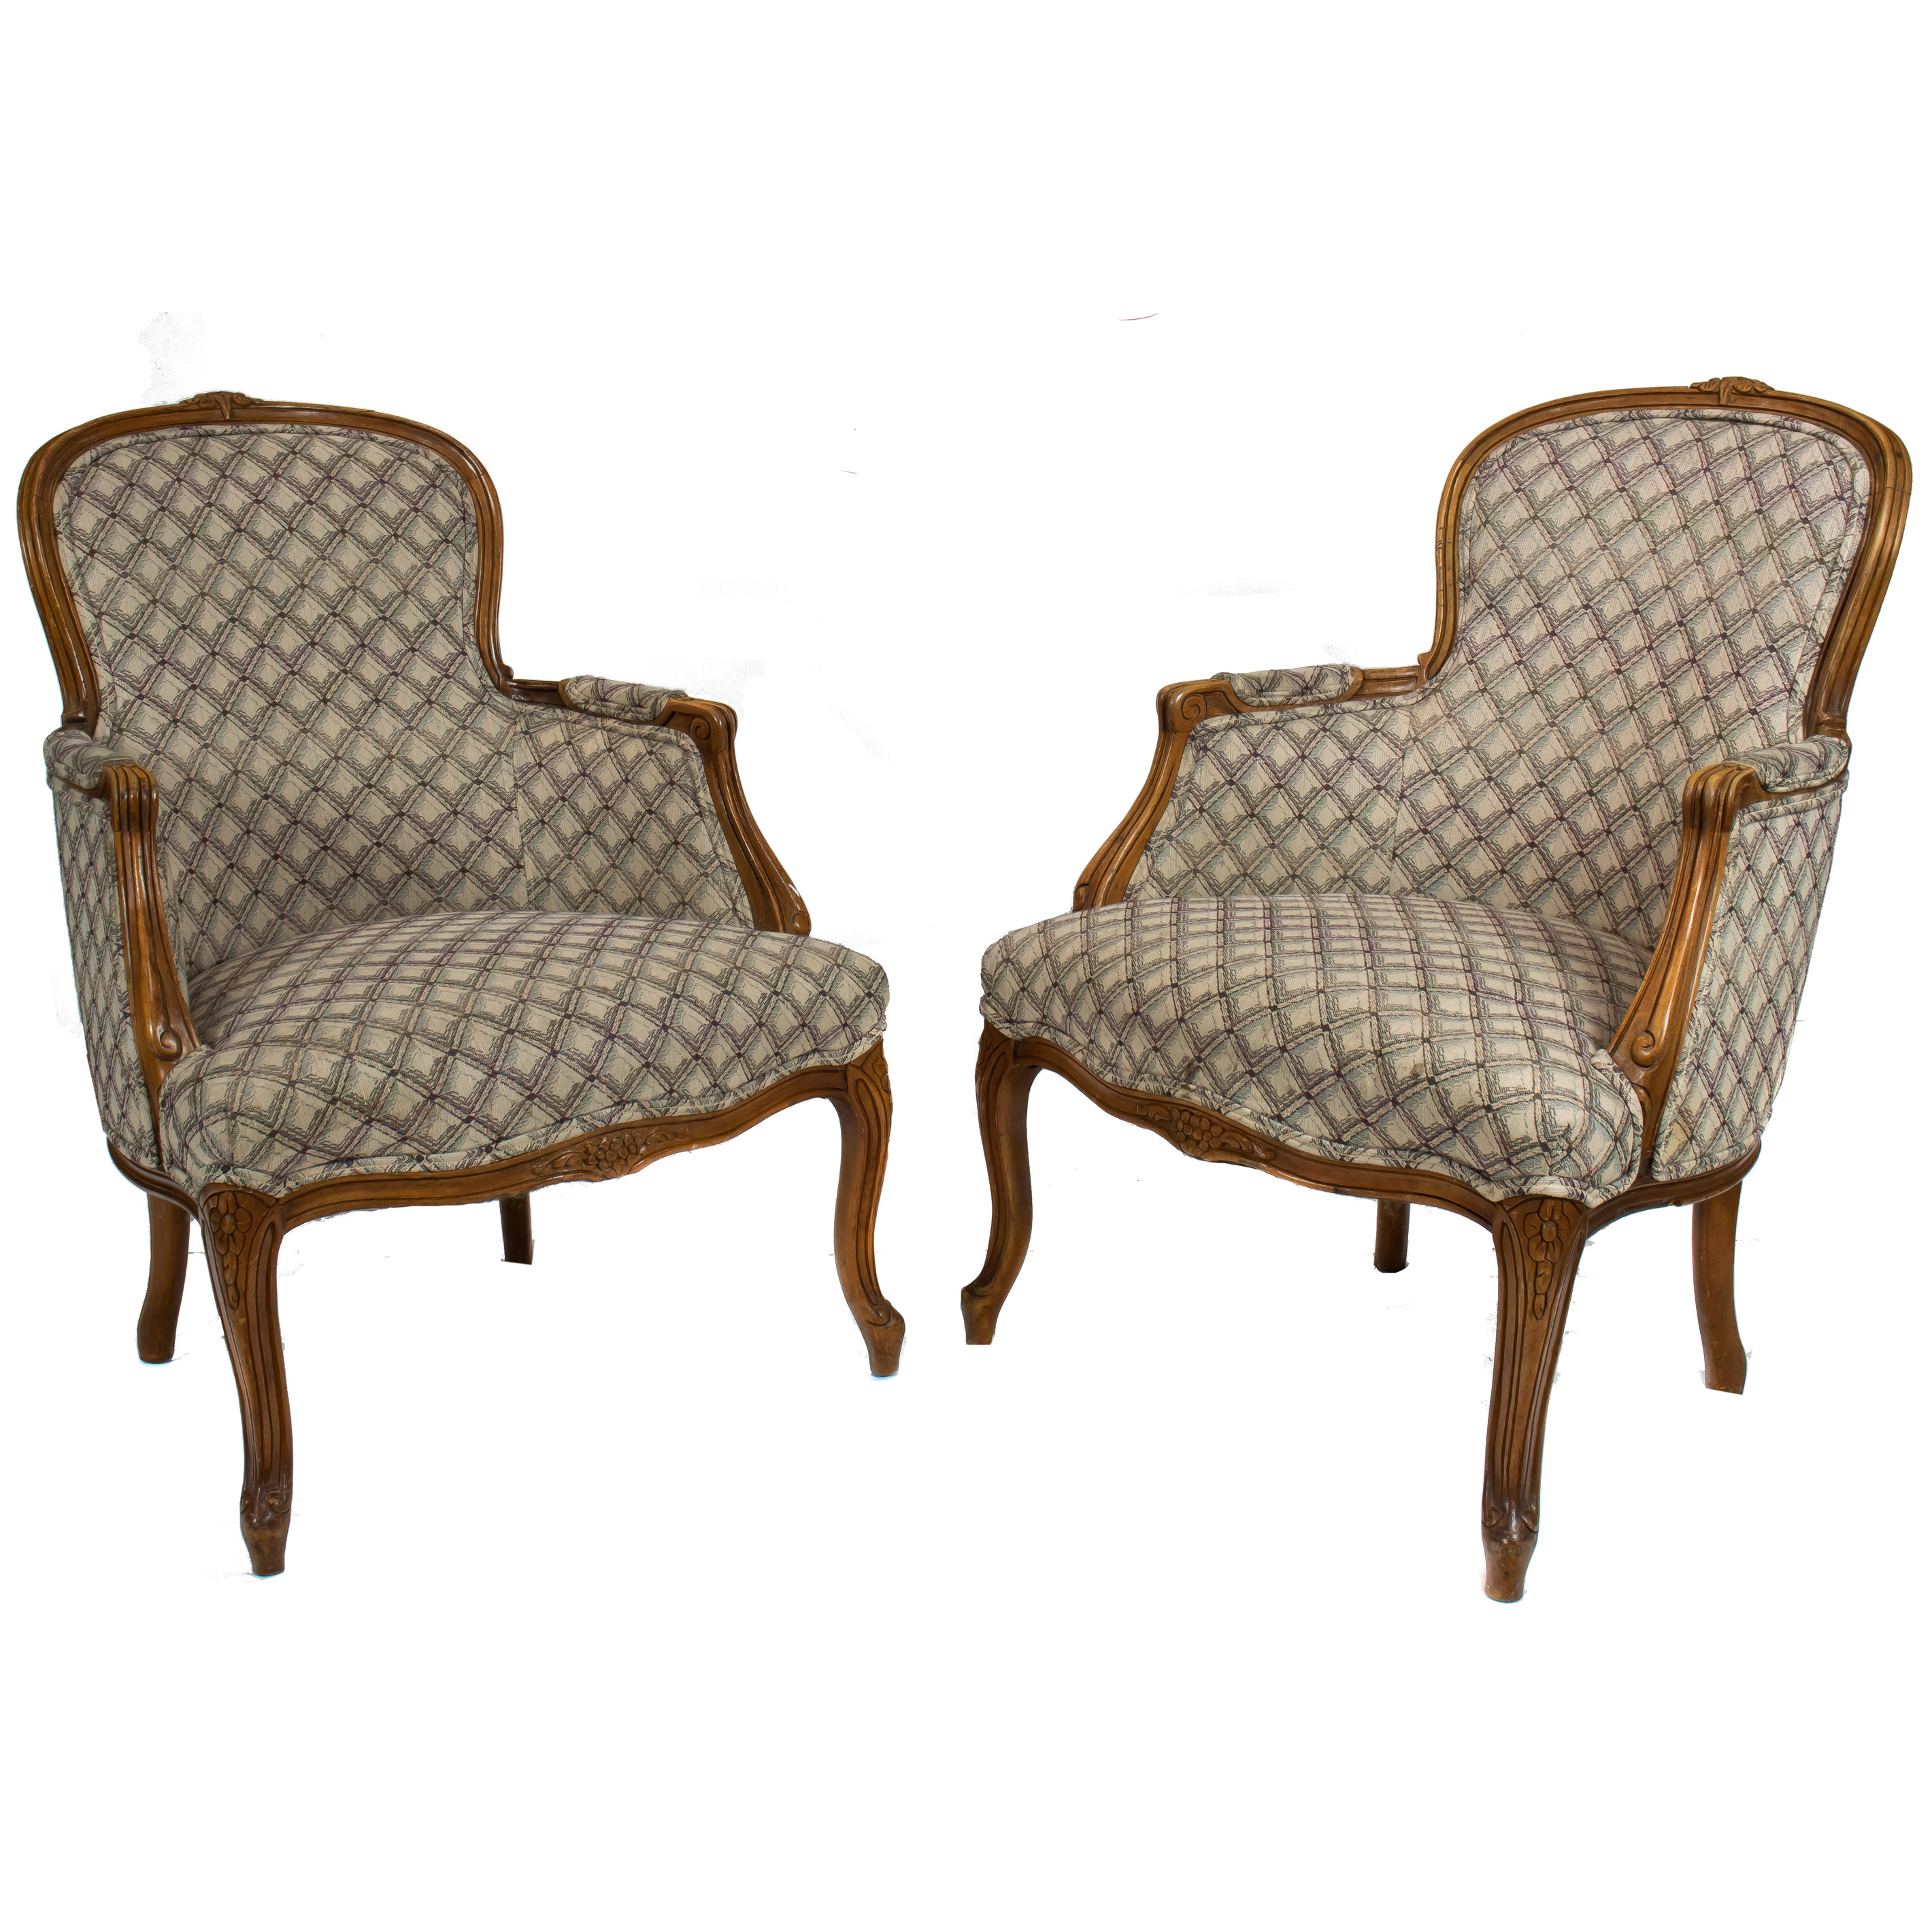 A PAIR OF FRENCH PROVINCIAL STYLE